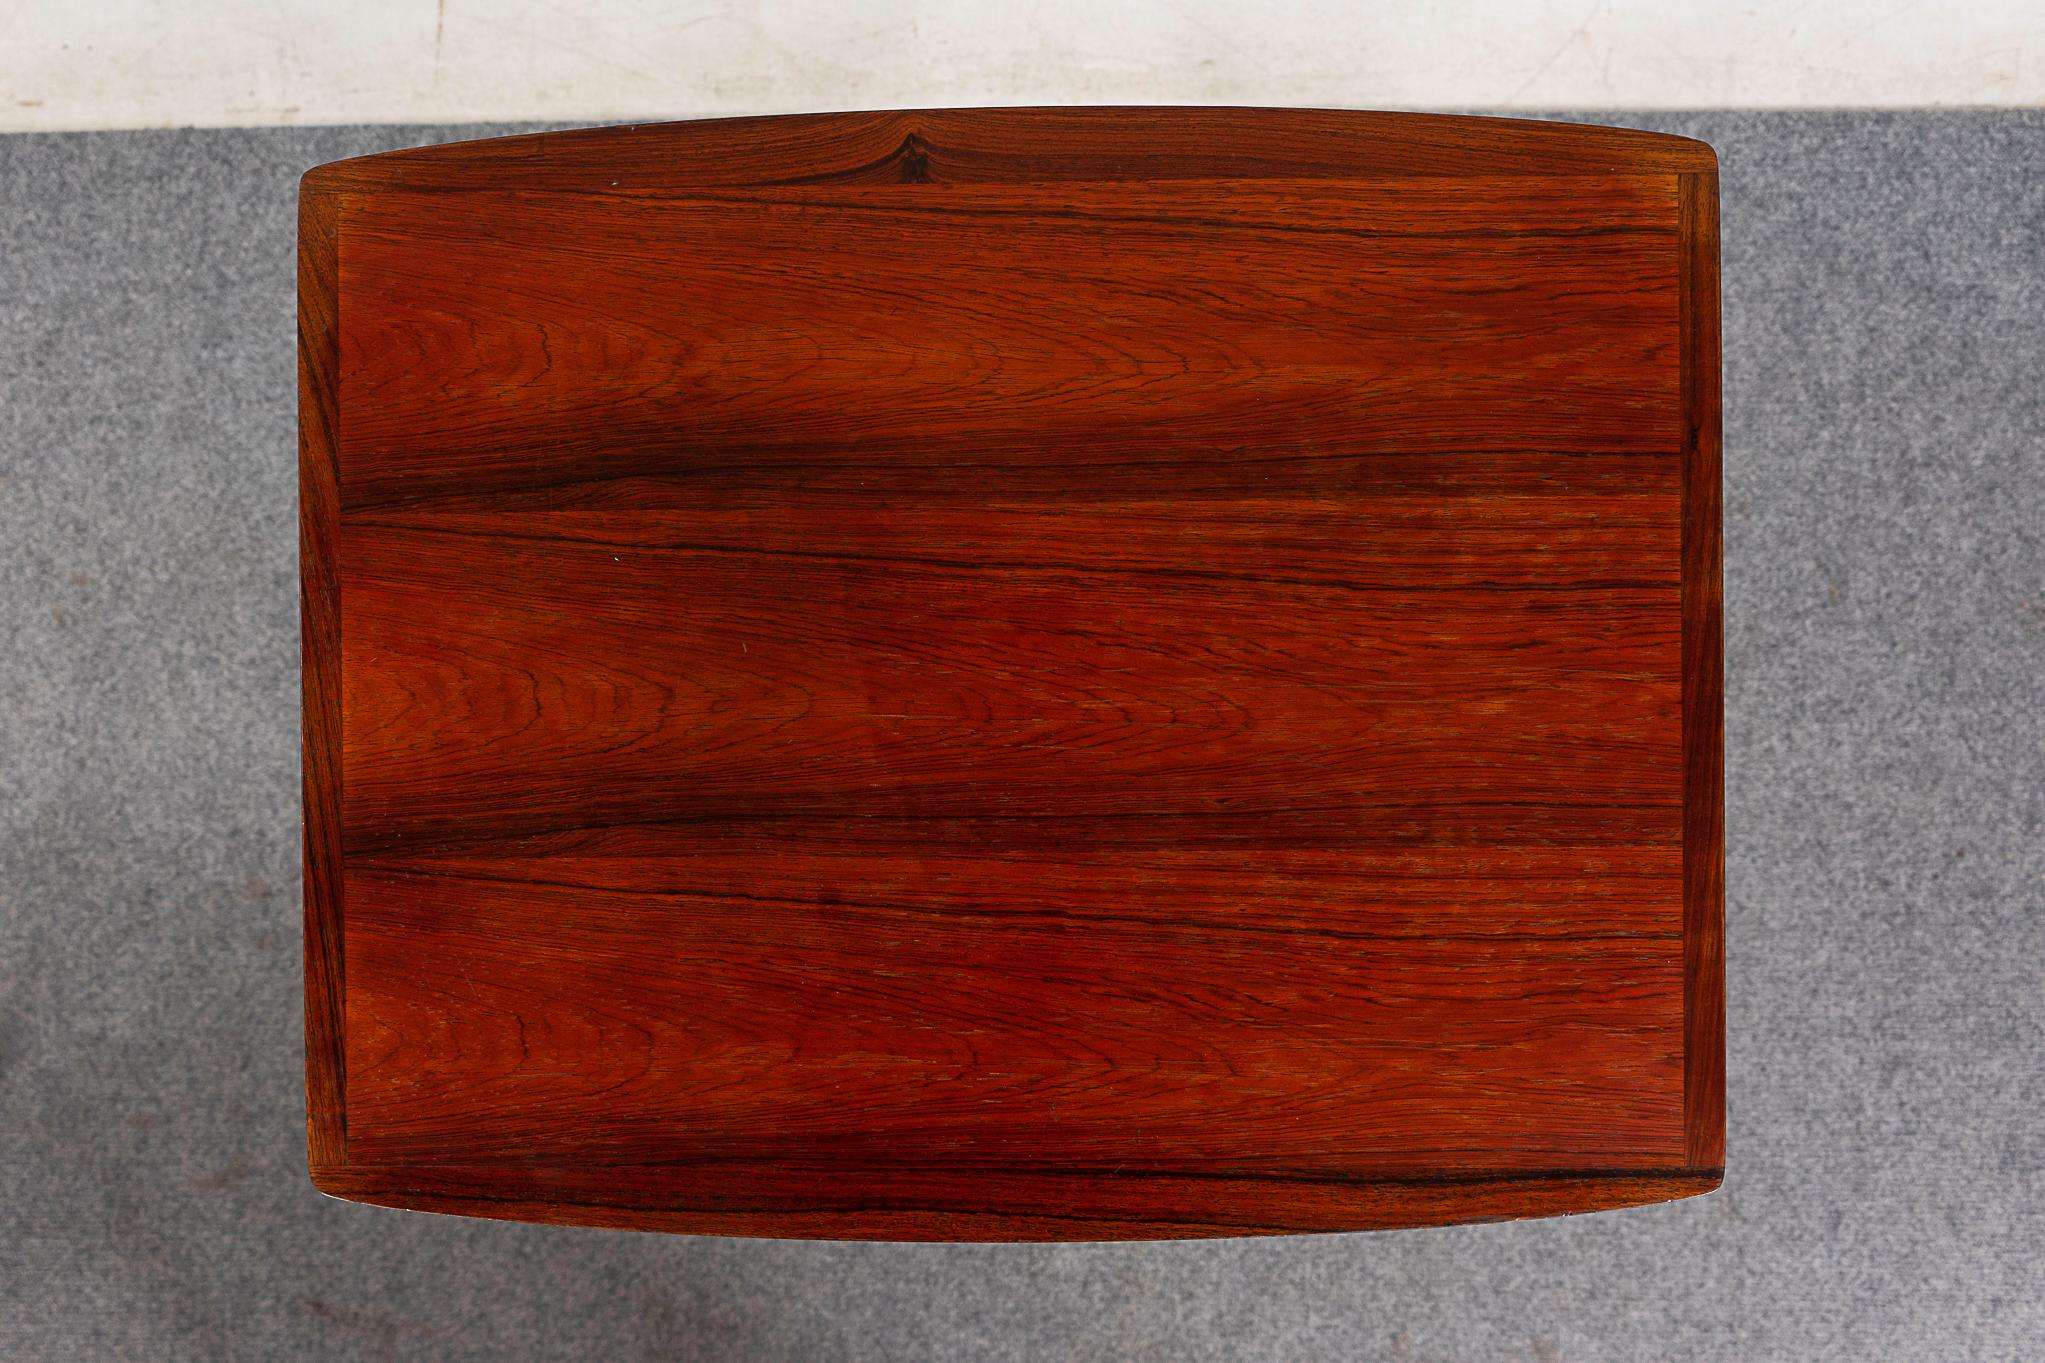 Danish Mid-Centruy Modern Rosewood Nesting Tables by Mobelintarsia For Sale 5